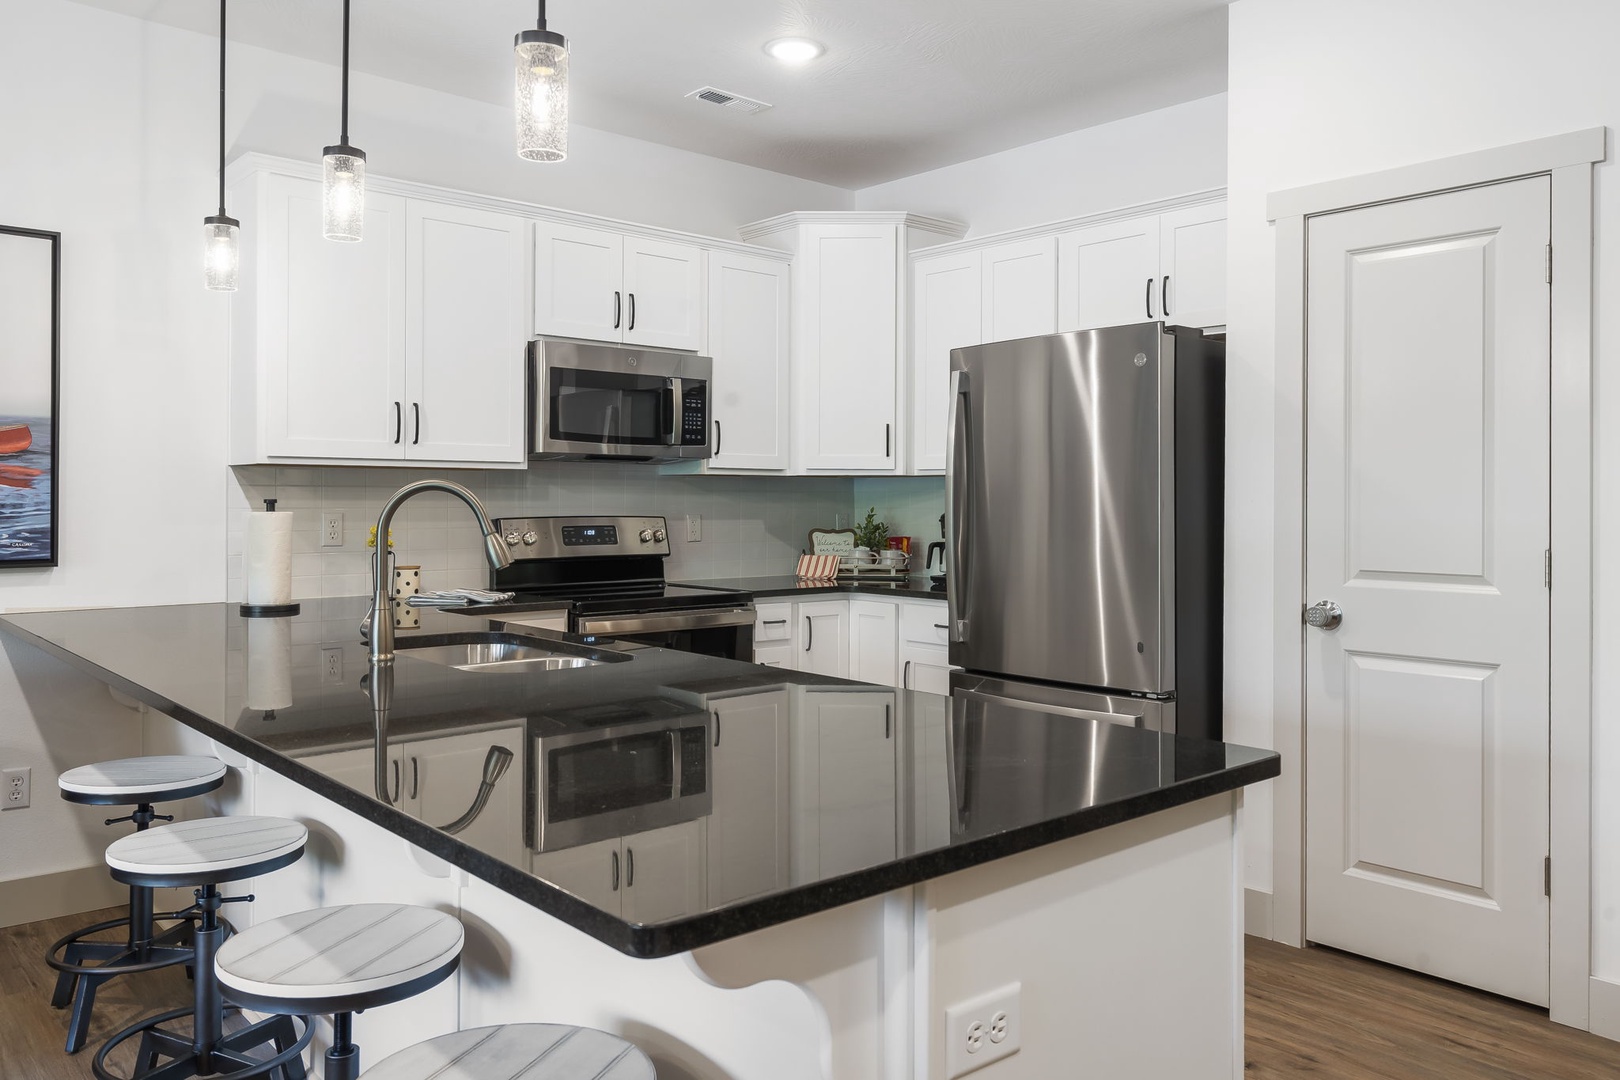 The open kitchen boasts ample counter/storage space and fantastic amenities